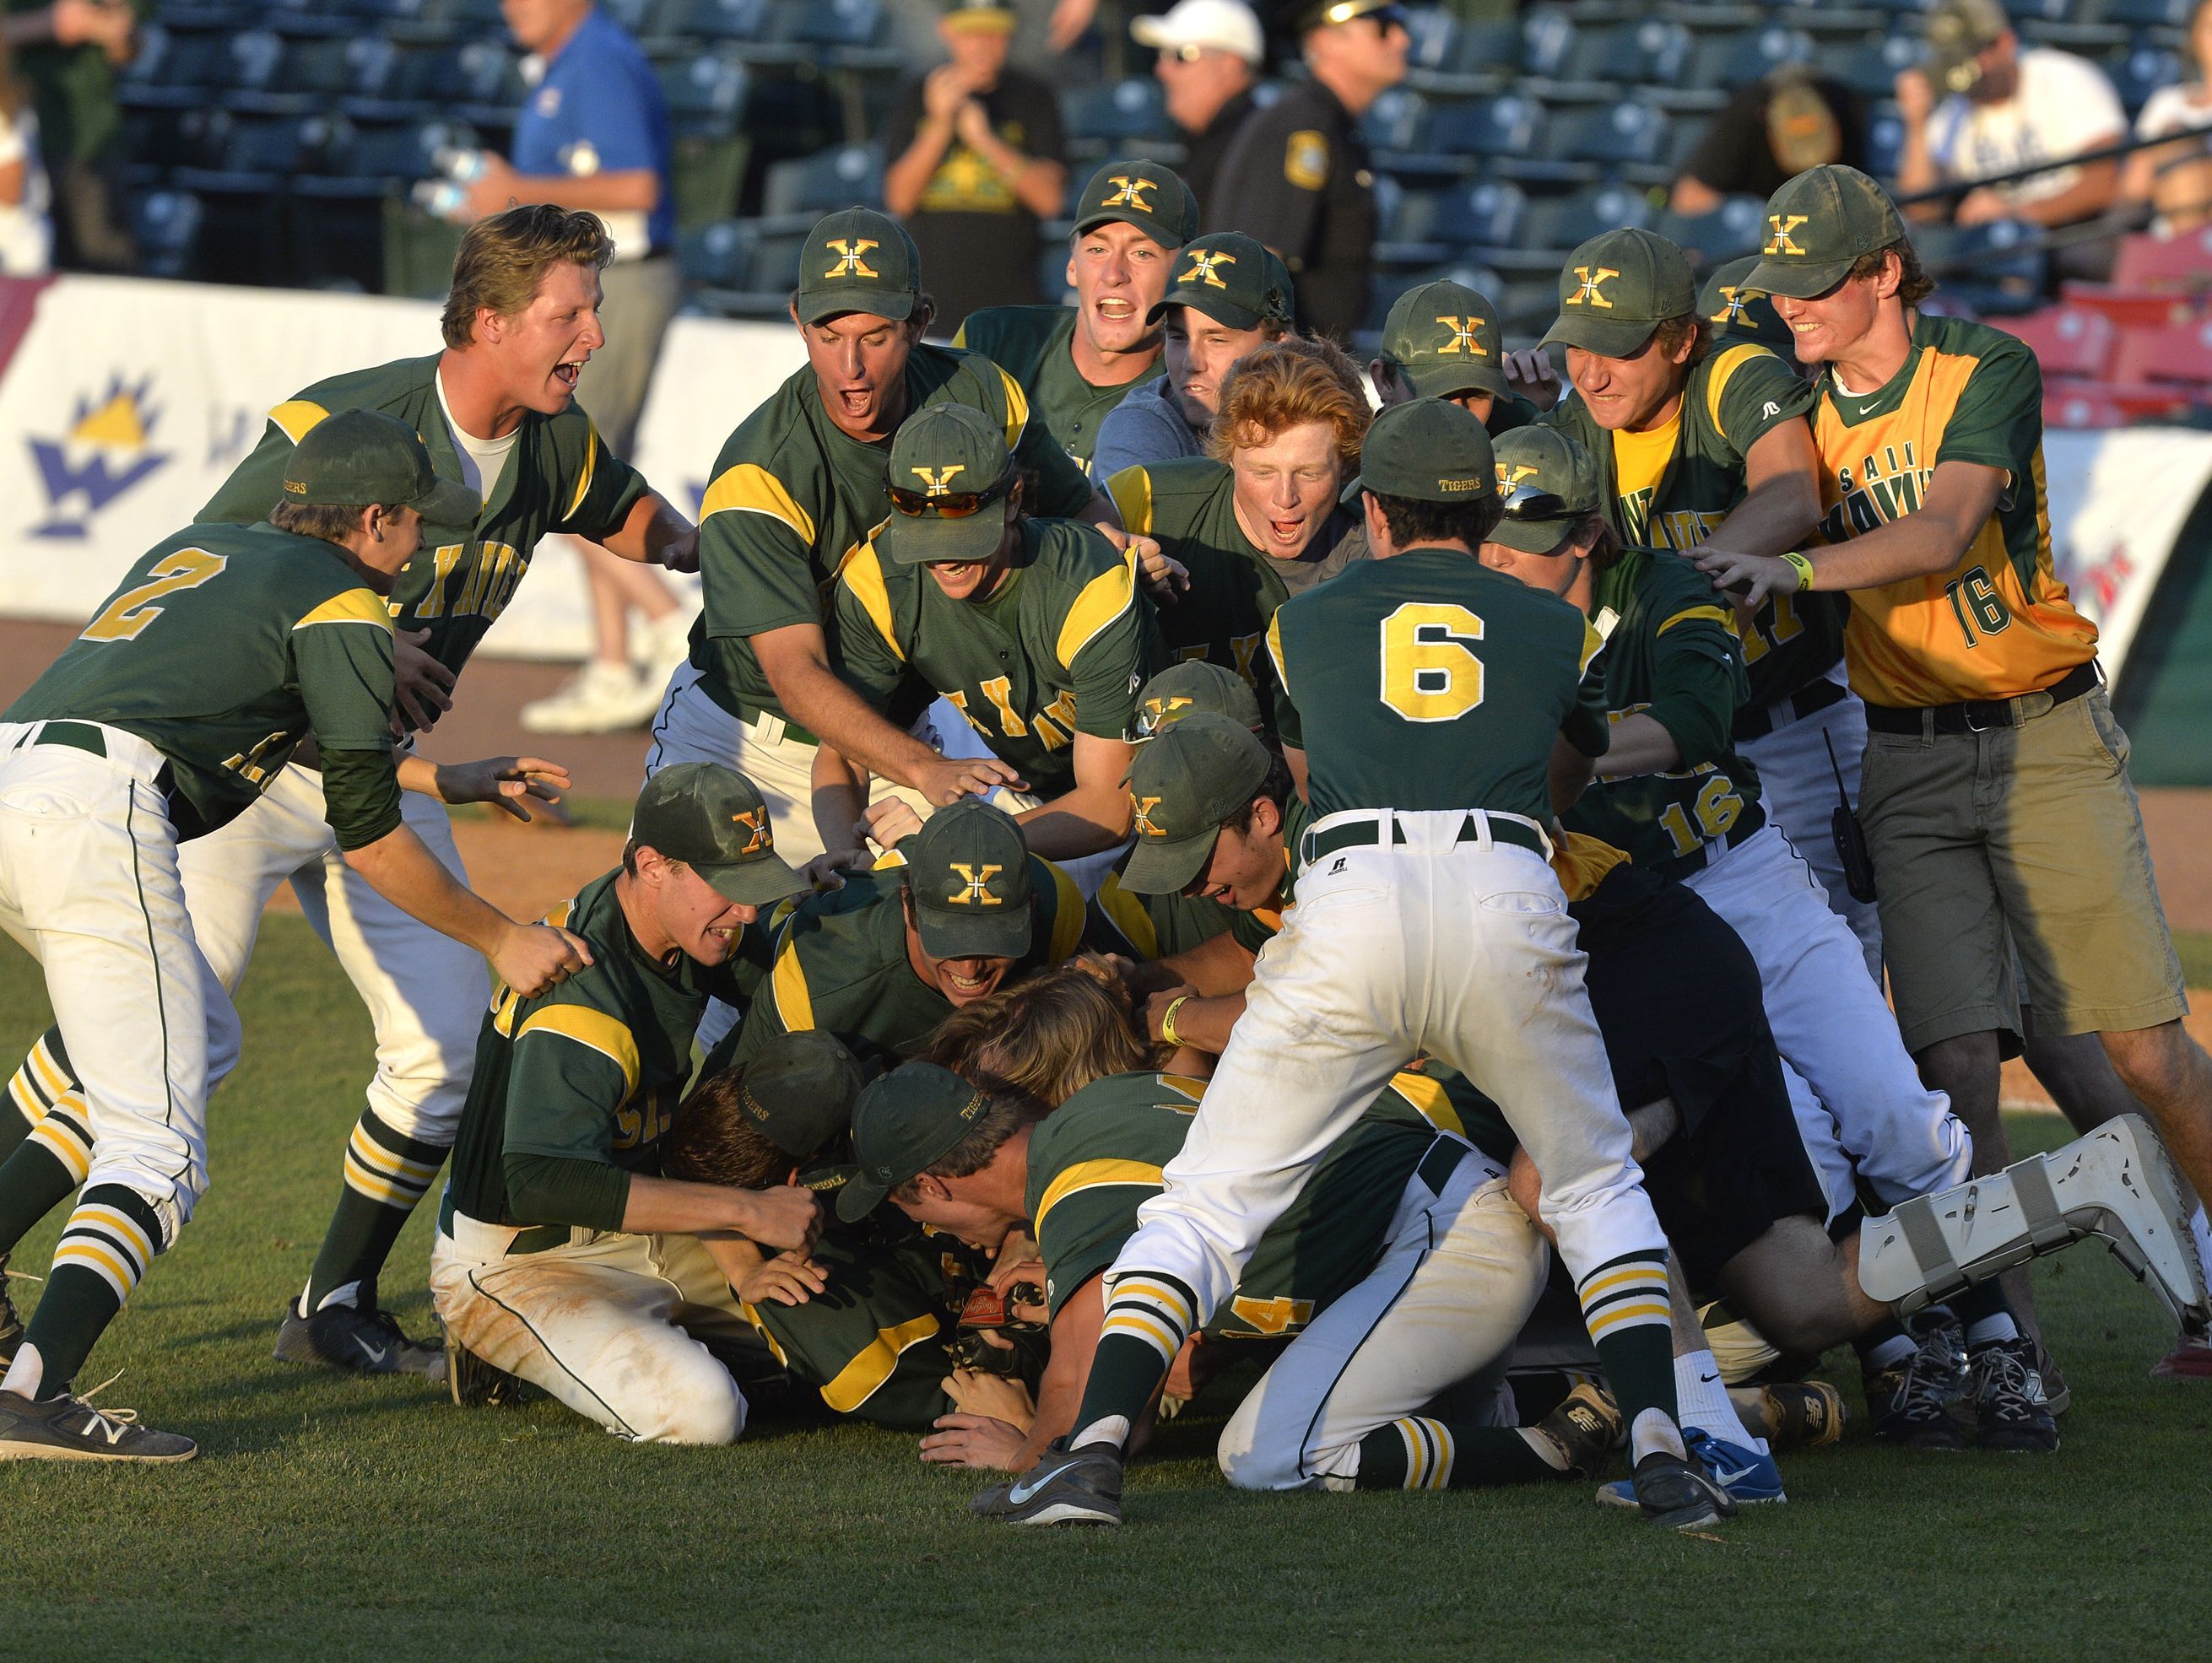 Members of the St. Xavier baseball team celebrate following their 1-0 victory in their Kentucky State baseball championship game Against Campbell County, Saturday, June 18, 2016 in Lexington Ky. (Timothy D. Easley/Special to the C-J)